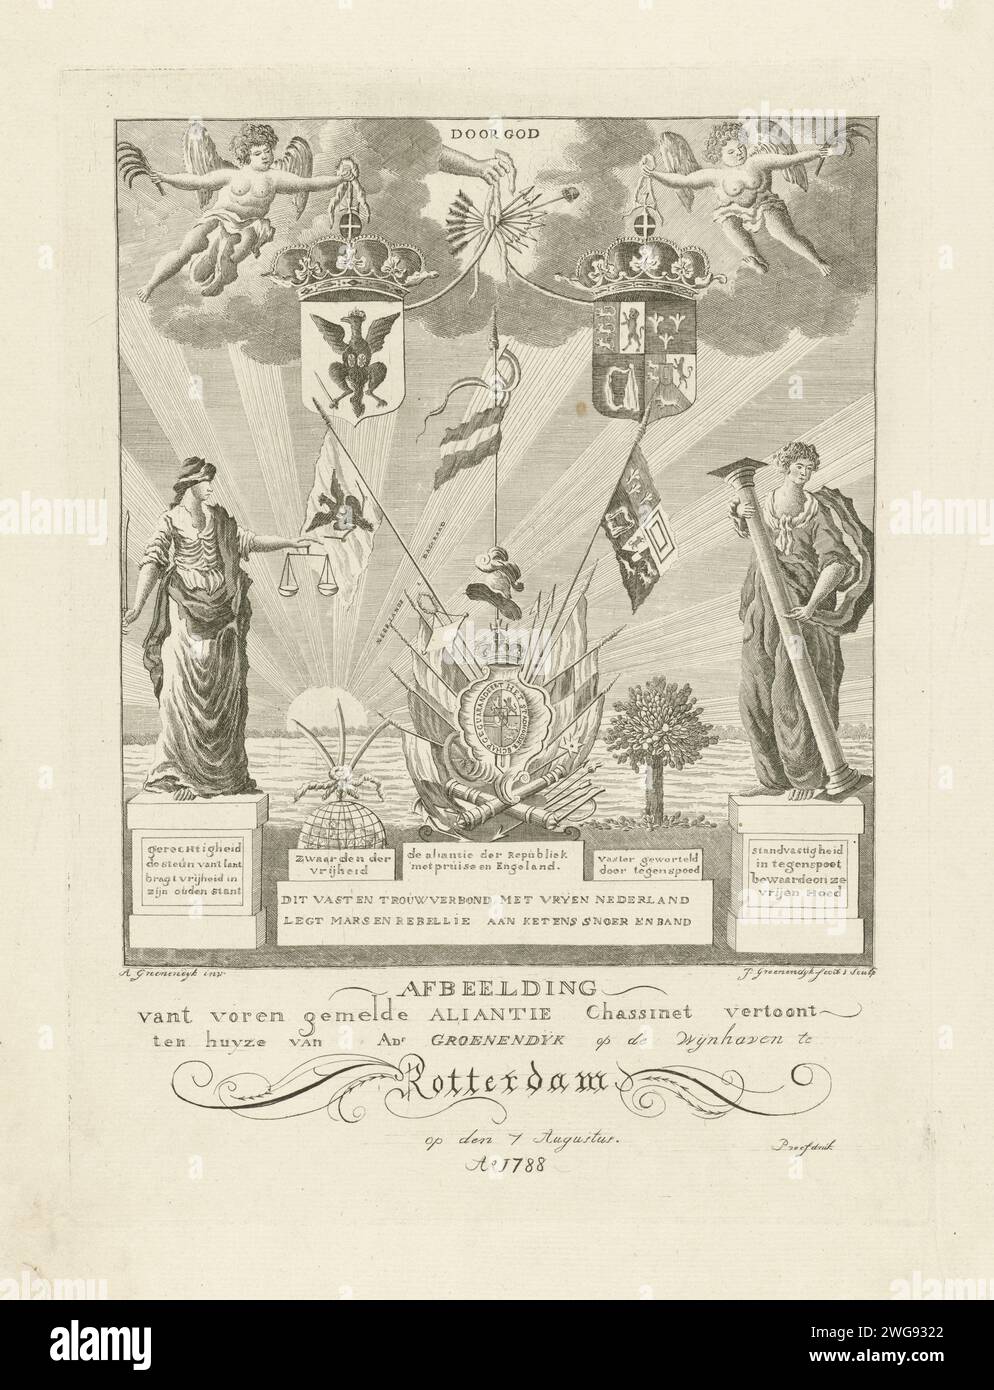 Allegory on the Triple Alliance between the Republic of the Seven United Provinces, Prussia and the United Kingdom, 1788, Jacob Groenendijk, After A. Groenendijk, 1788 print Allegory on the Triple Alliance from 1788 in Rebus form. In the middle the coat of arms of the Republic of the Seven United Provinces. In addition, the coats of arms of Prussia (left) and the United Kingdom (right), stopped by angels and by the hand of God. In addition to the coats of arms, three swords that are bound together and the personification justice. On the right a rooted tree and the personification steadfastness Stock Photo